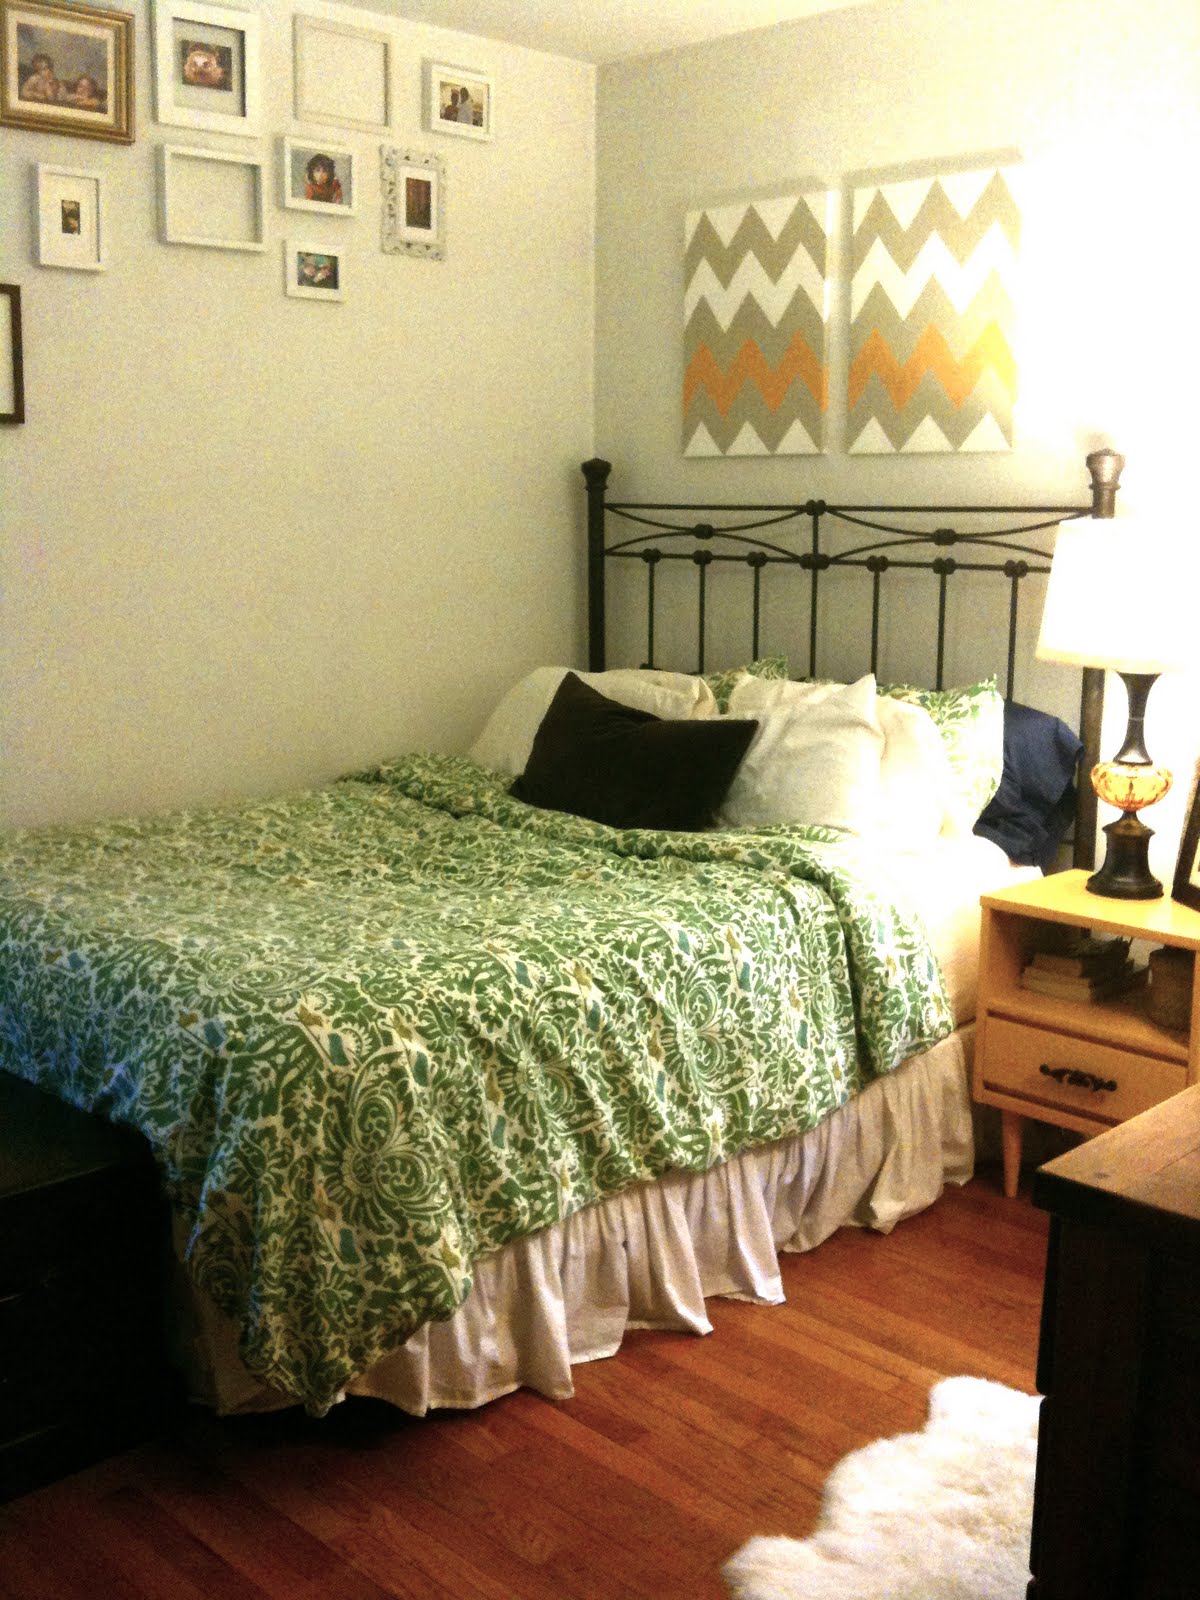 change of scenery: Bedroom mission complete(ish).